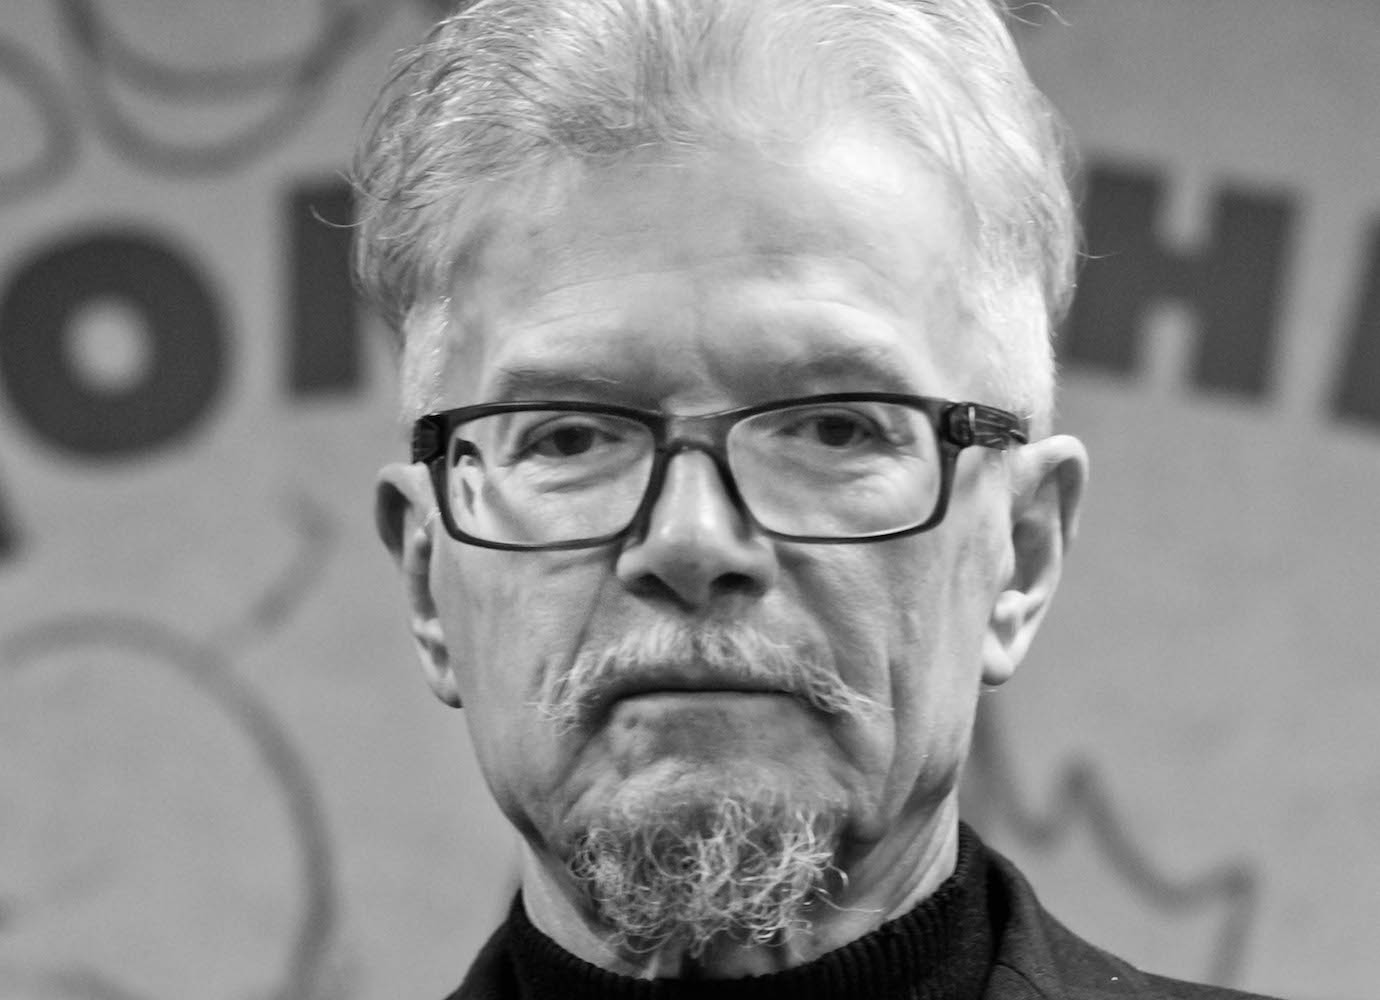 Assessing Limonov, Russia’s most controversial writer